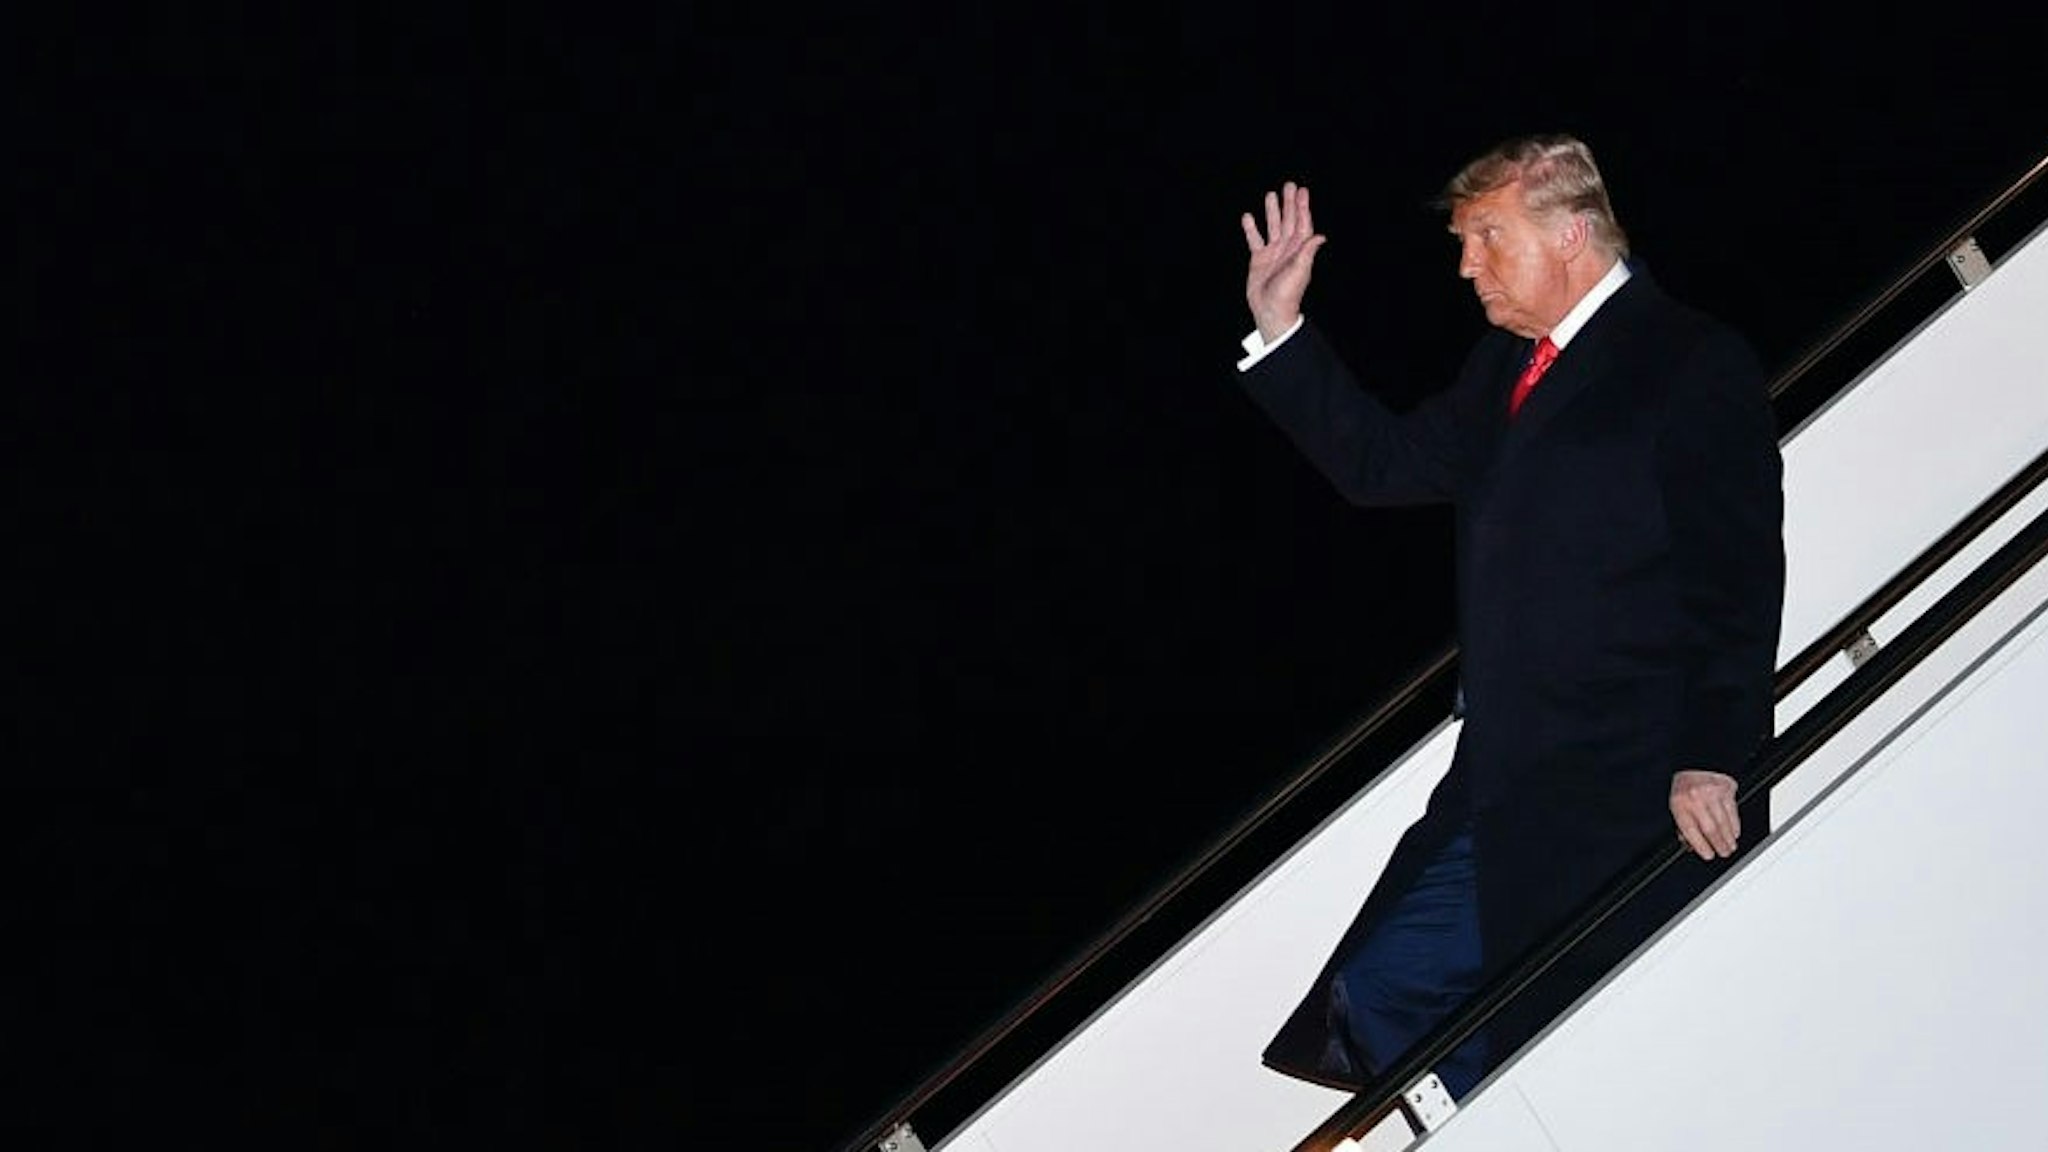 US President Donald Trump waves as he steps off Air Force One upon arrival at Andrews Air Force Base in Maryland on January 12, 2021. - US President Donald Trump comes back from touring a section of the border wall in Alamo, Texas. (Photo by MANDEL NGAN / AFP) (Photo by